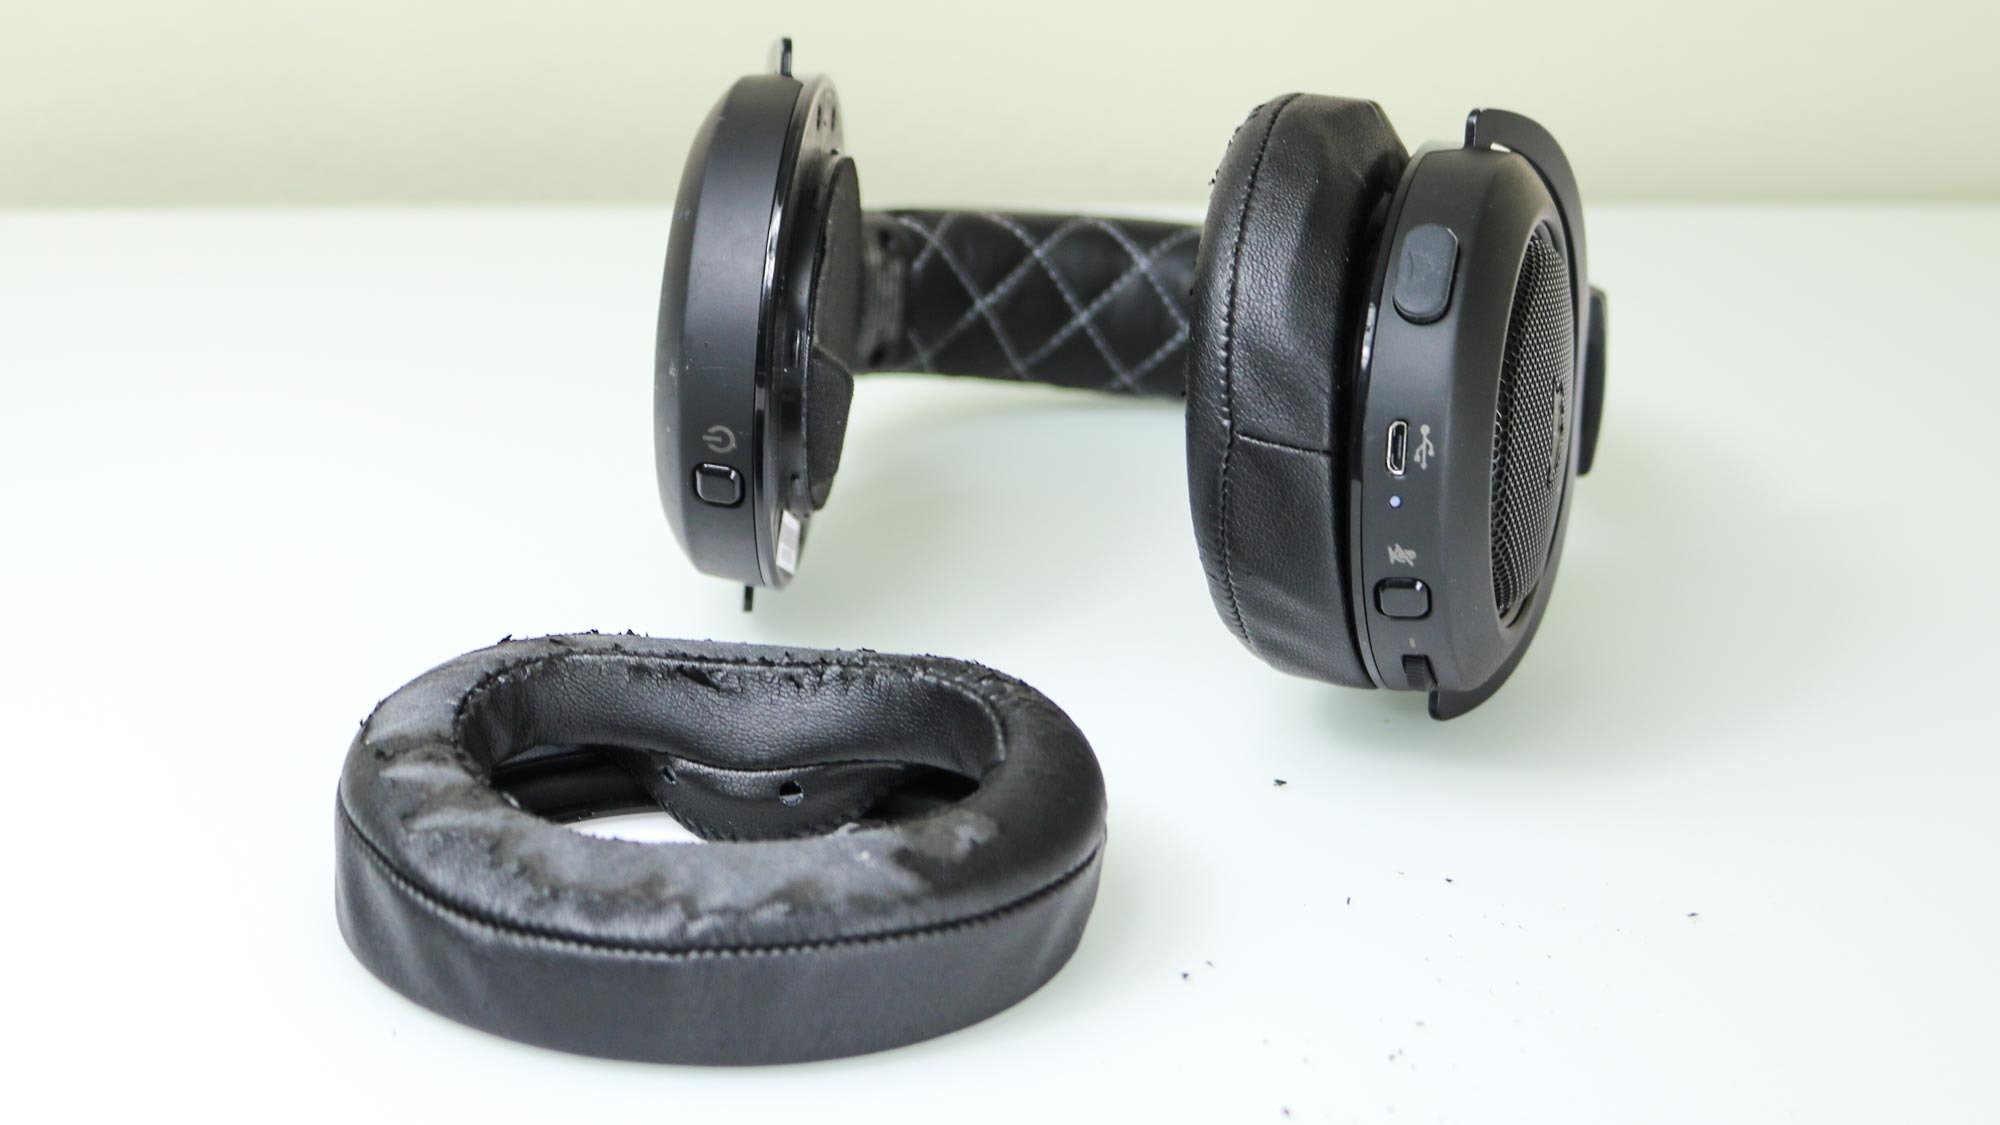 A Corsair HS70 headset with one old, broken ear cup removed